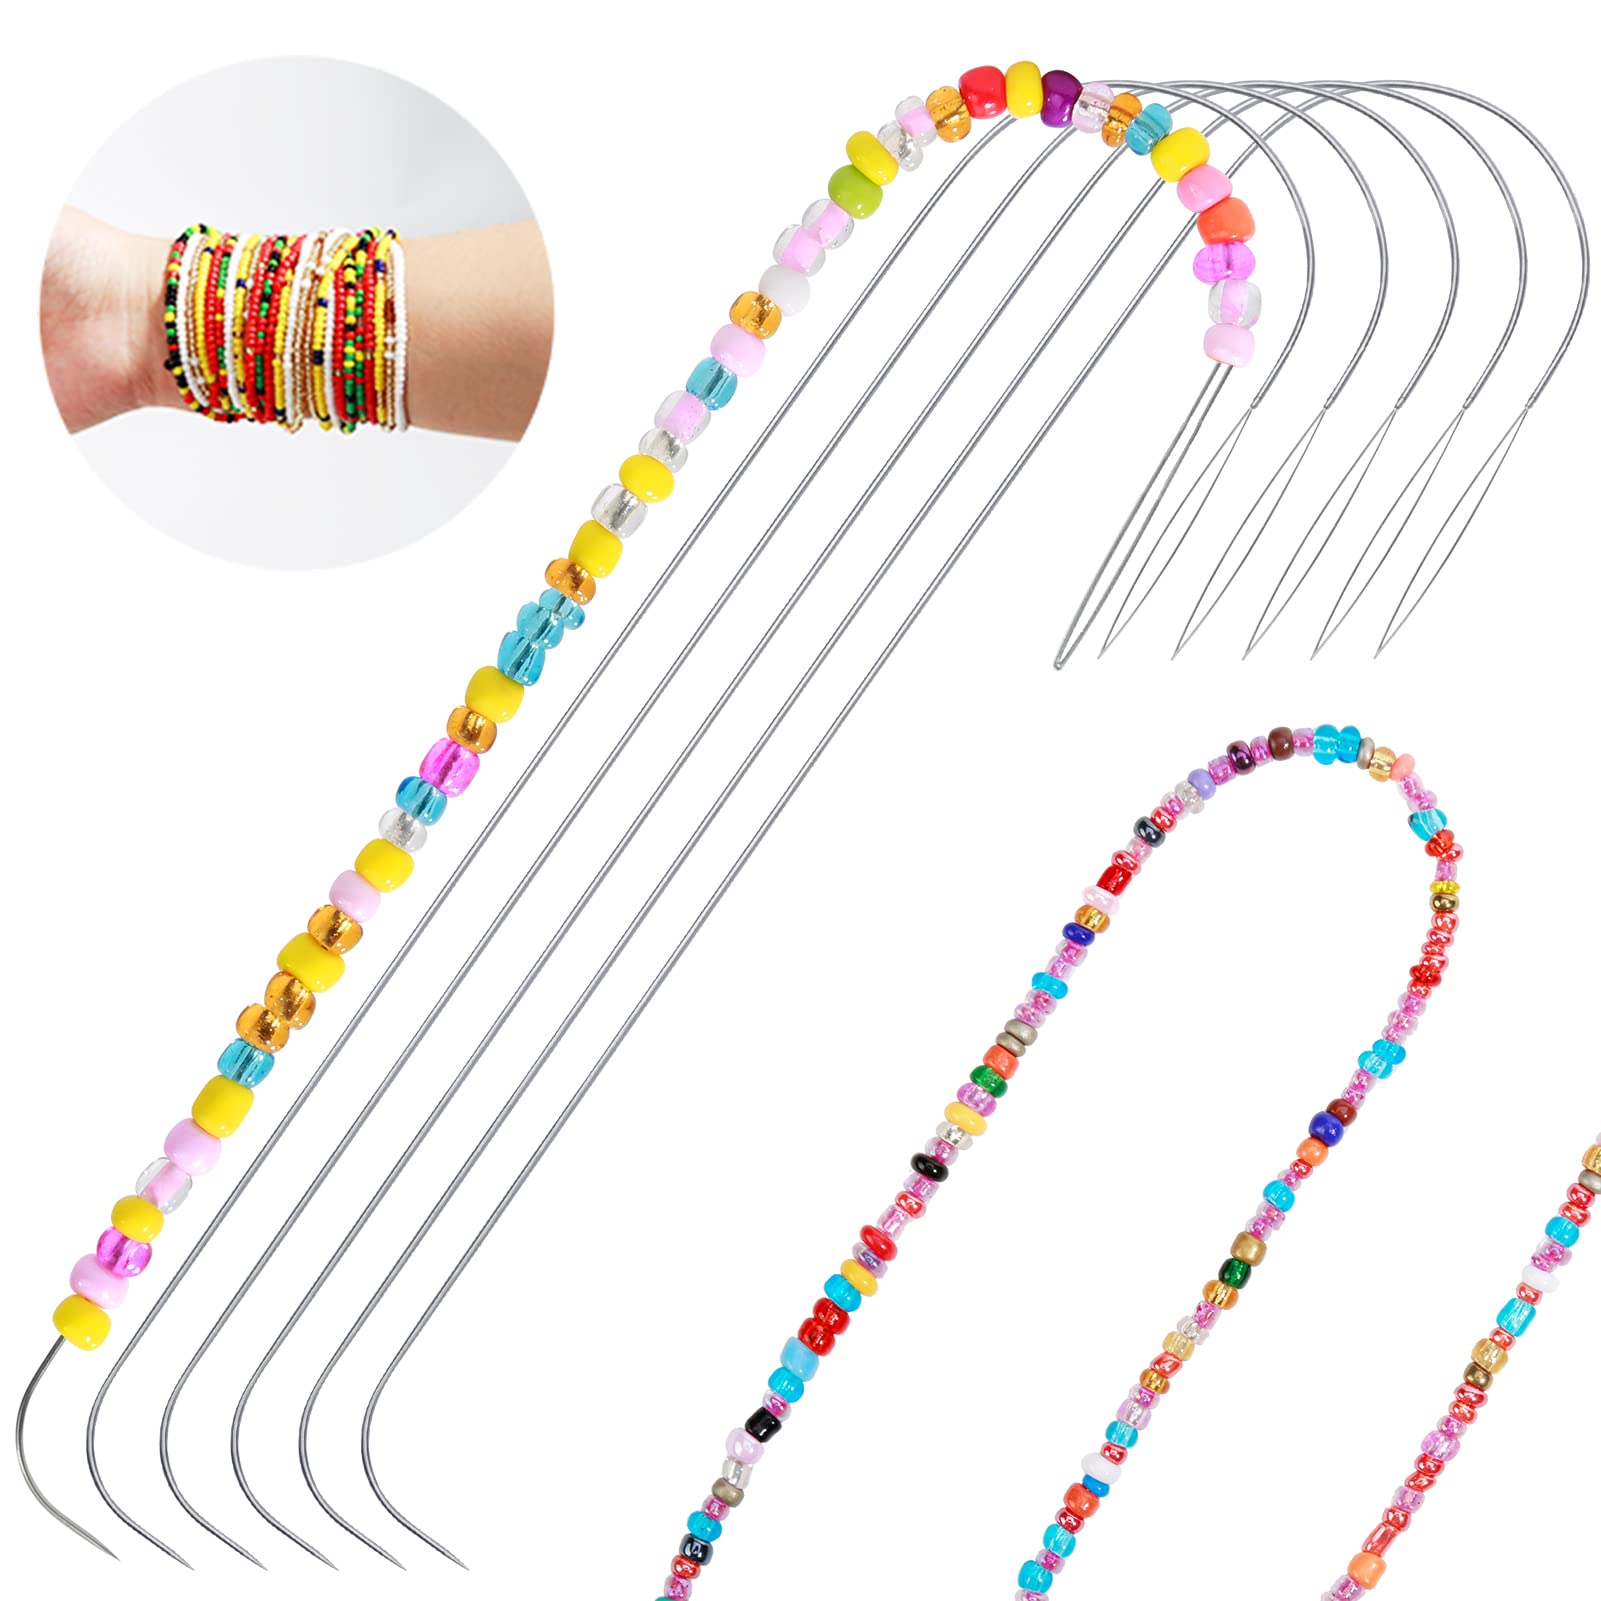 Miss Rabbit Jewelry Making Kit 4 mm Glass Seed Beads for DIY Bracelet  Making Kit for Kids Girls Adults Crafts Alphabet Letter Beads for  Friendship